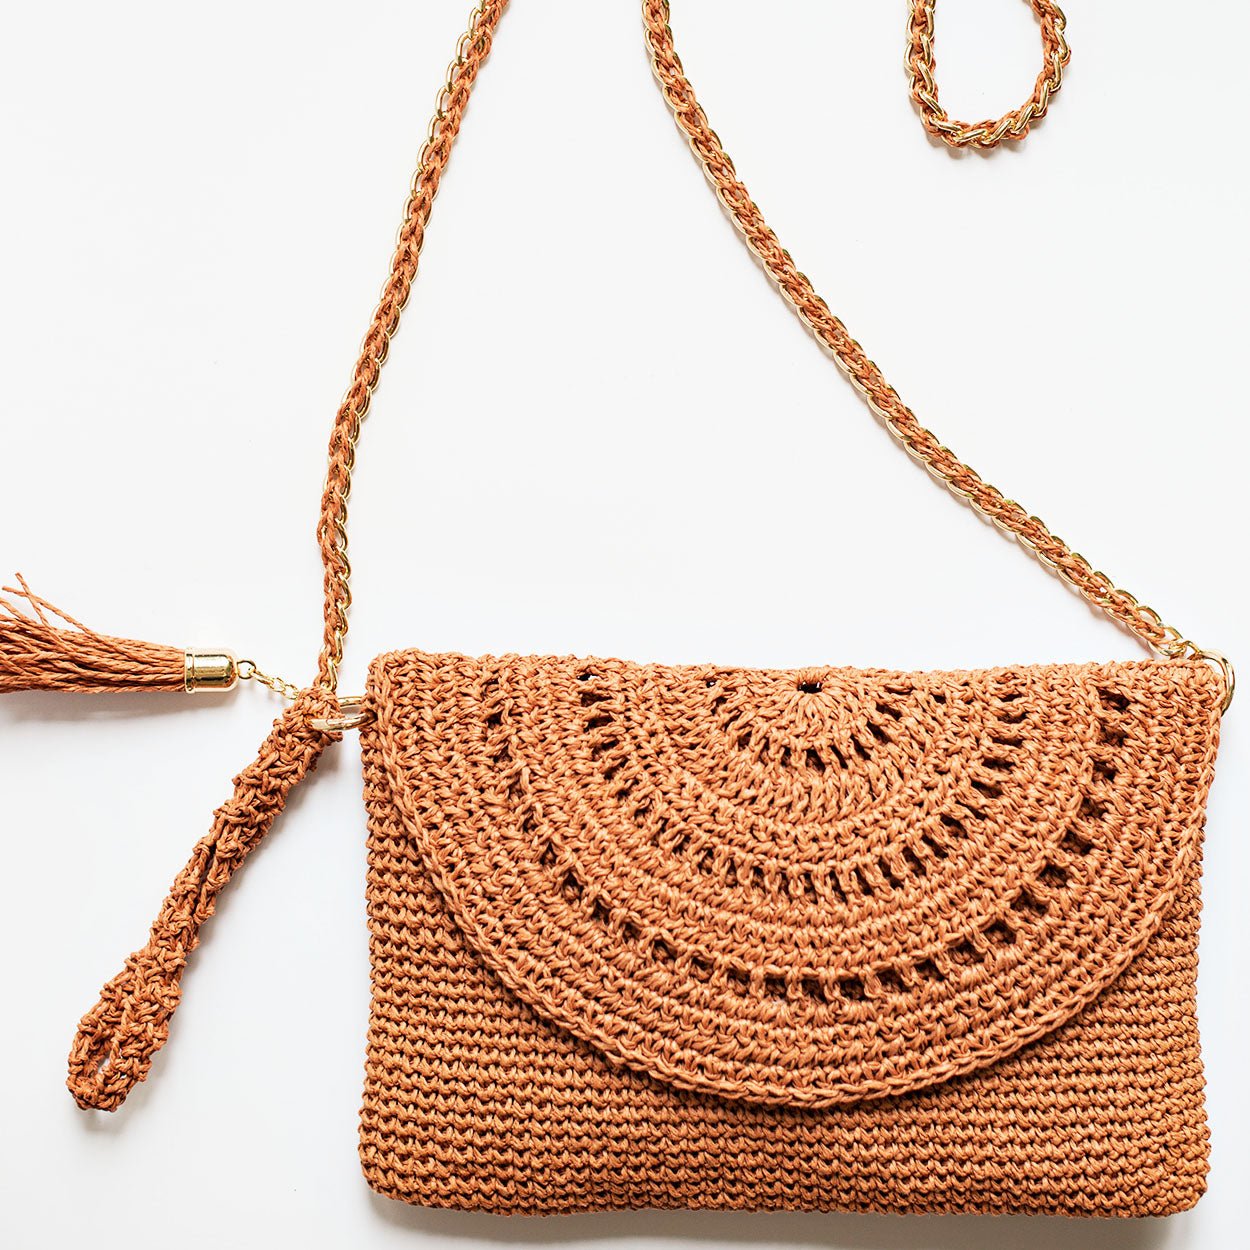 Grace Bag hand crocheted with sustainable paper yarn - Salmon - SJW BAGS LONDON